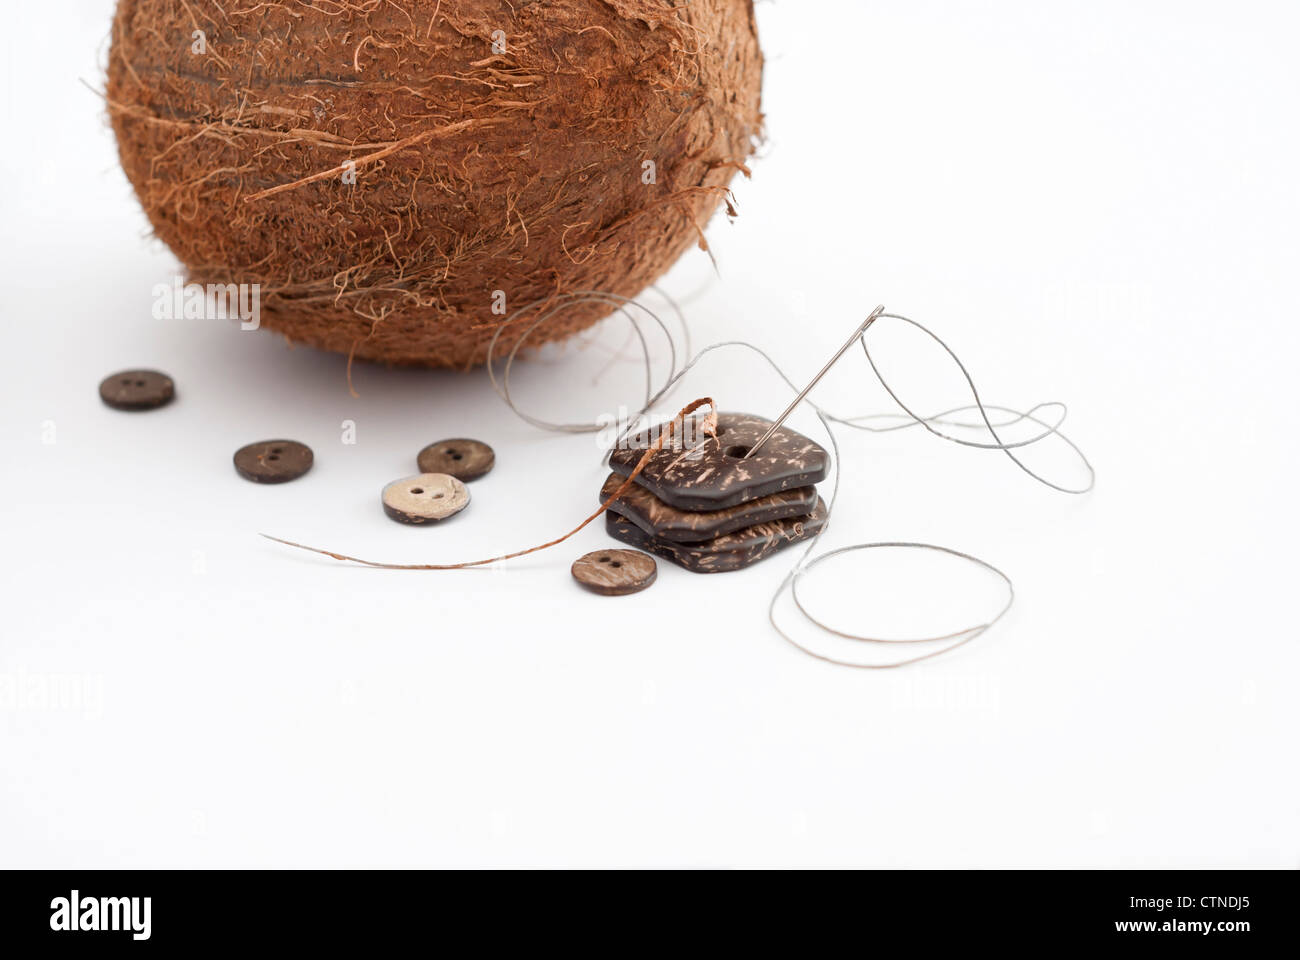 https://c8.alamy.com/comp/CTNDJ5/coconut-next-to-buttons-carved-from-coconut-shell-and-a-needle-and-CTNDJ5.jpg